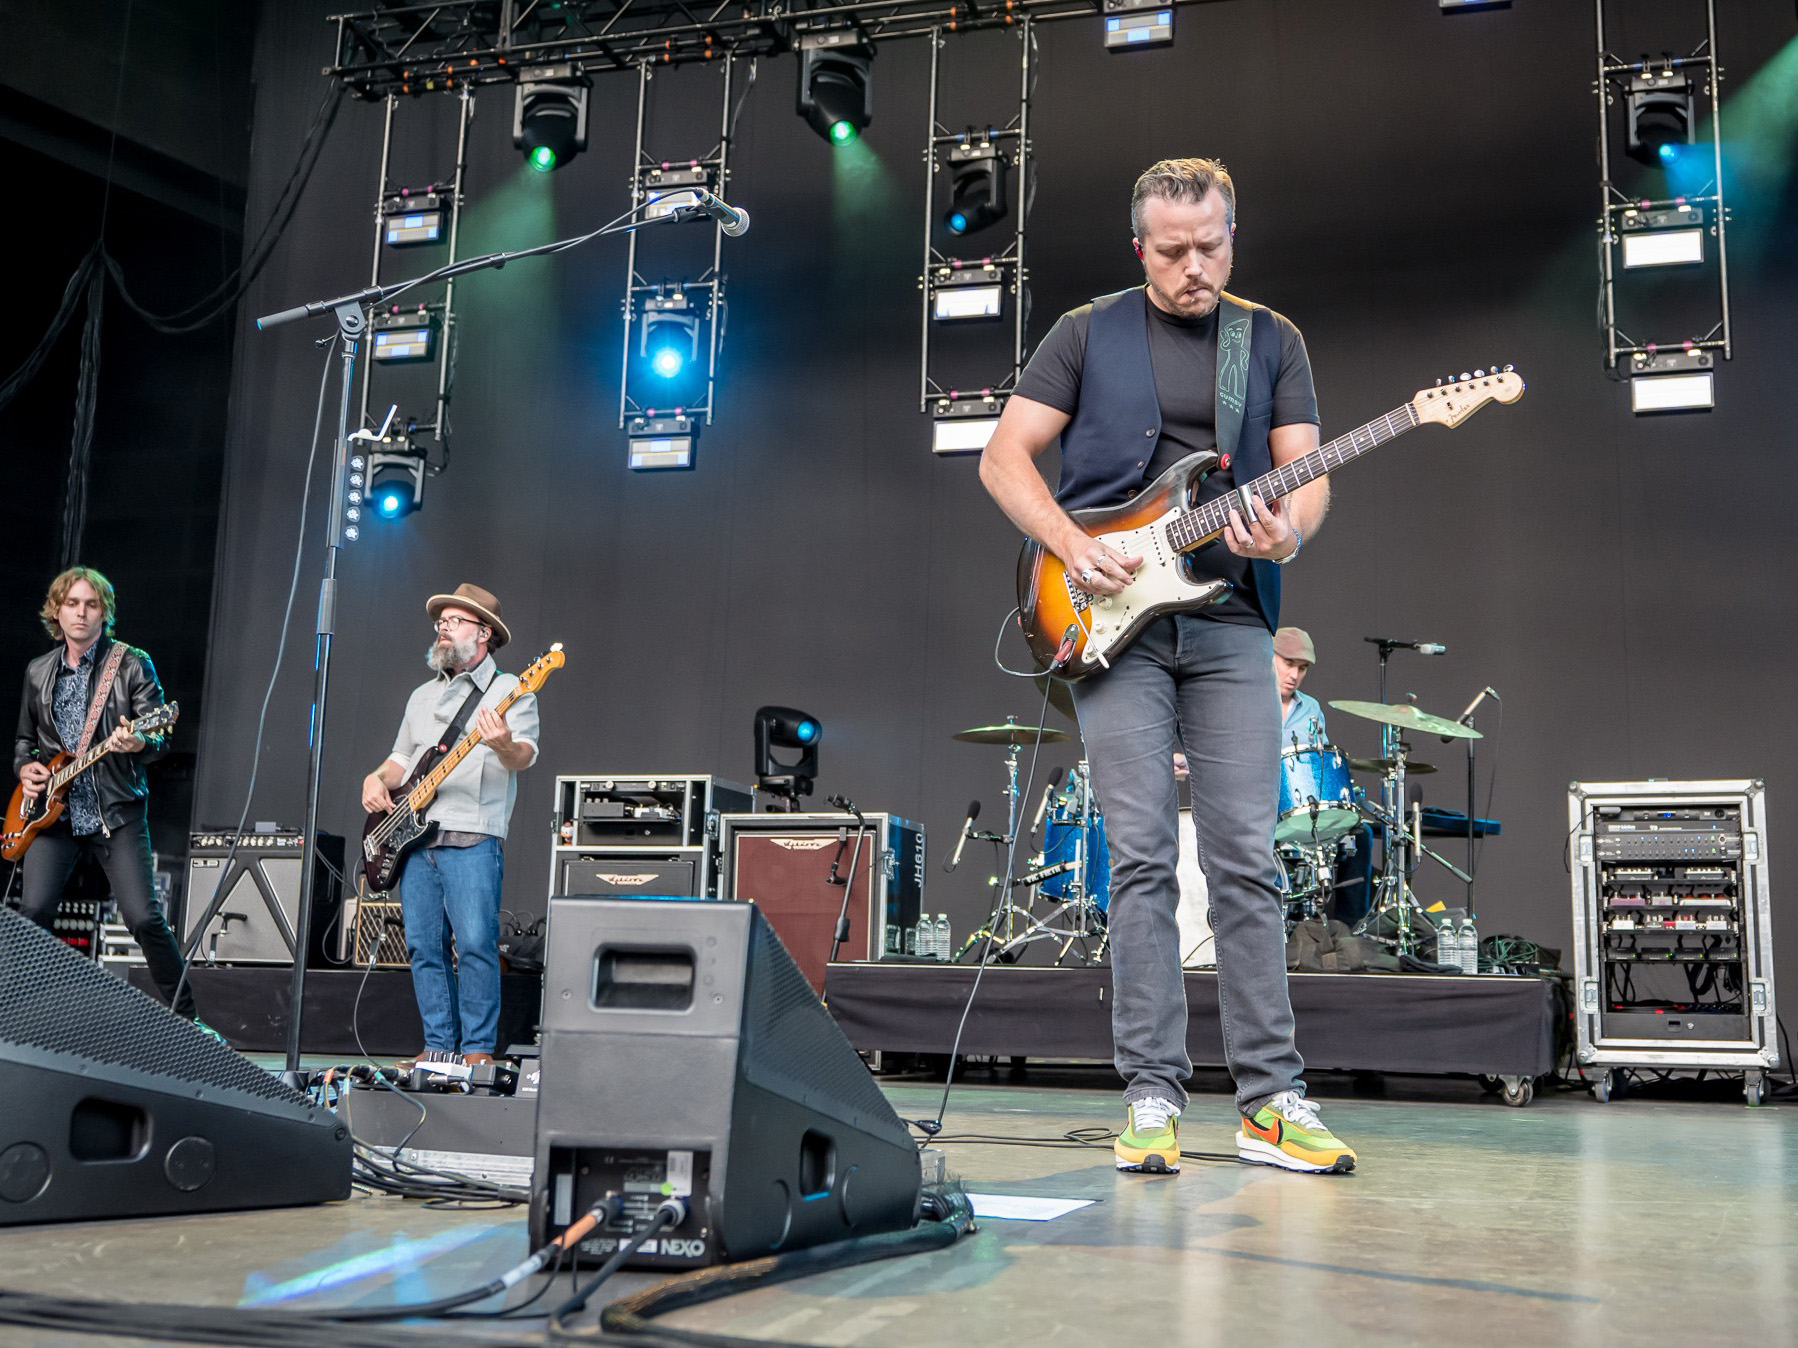 Jason Isbell & The 400 Unit at Frost Amphitheater